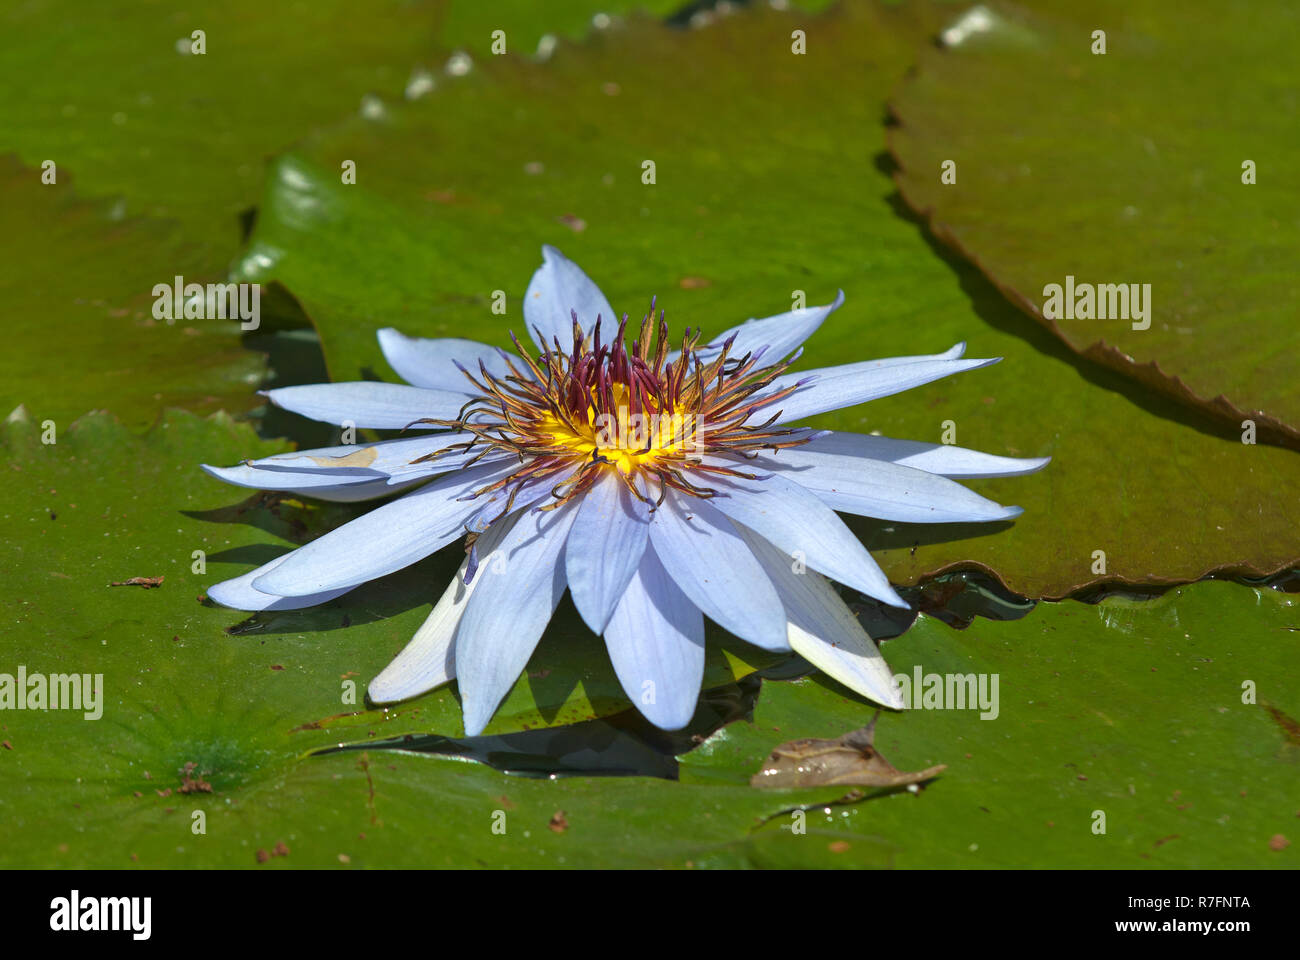 Water lily flower (Nymphaea) at Calgary zoo, Alberta, Canada Stock Photo